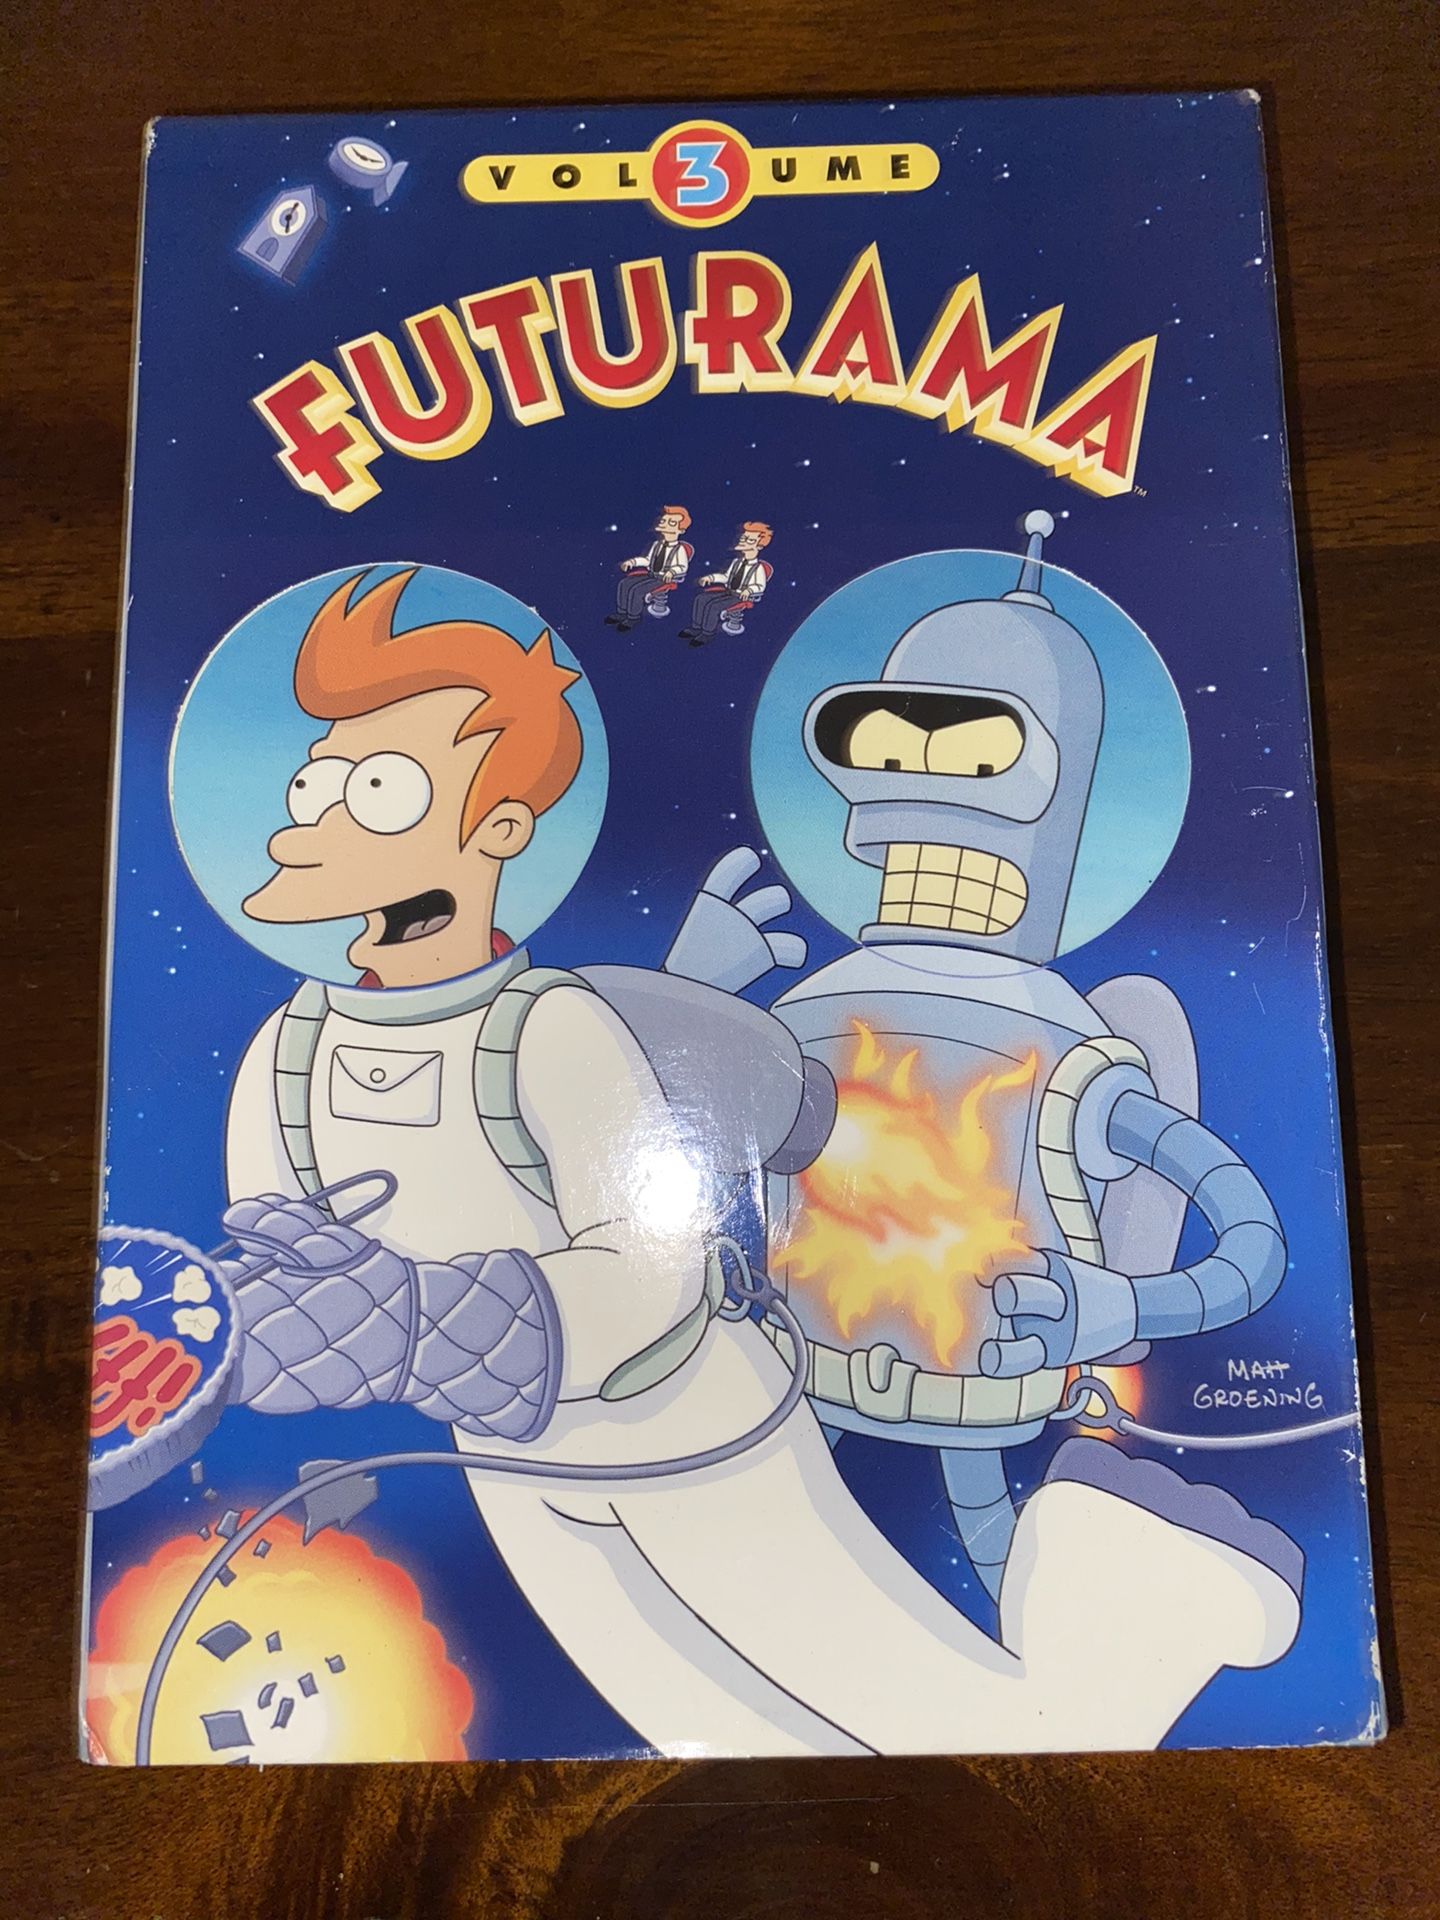 Futurama Vol 3 Missing 1 disk 3/4 Great Condition No Scratches